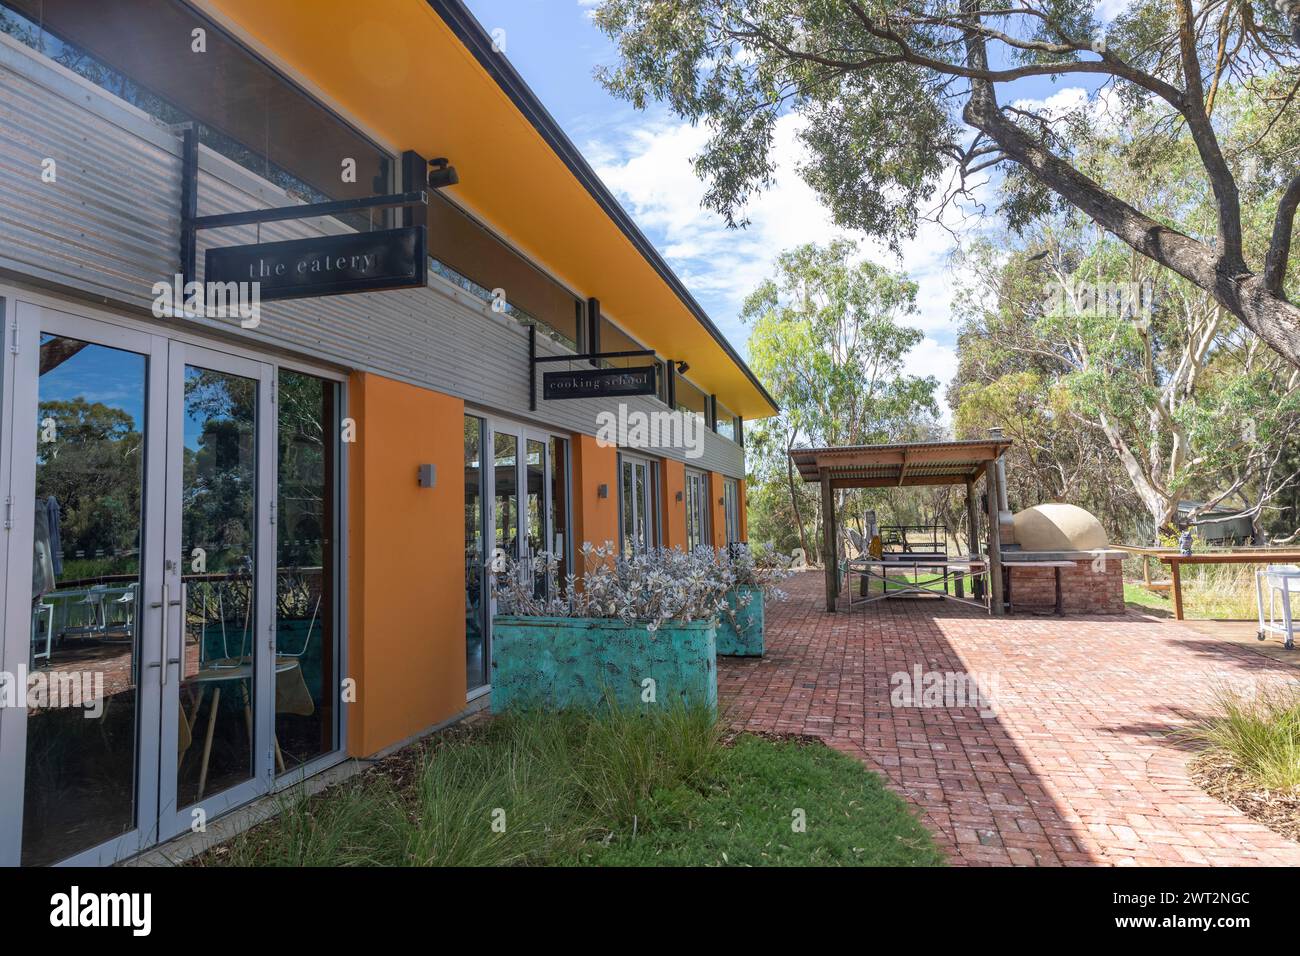 Maggie Beer farm shop in Nuriootpa, Barossa Valley,South Australia, fresh produce shop, cafe, eatery and cooking school, tourist attraction, Australia Stock Photo